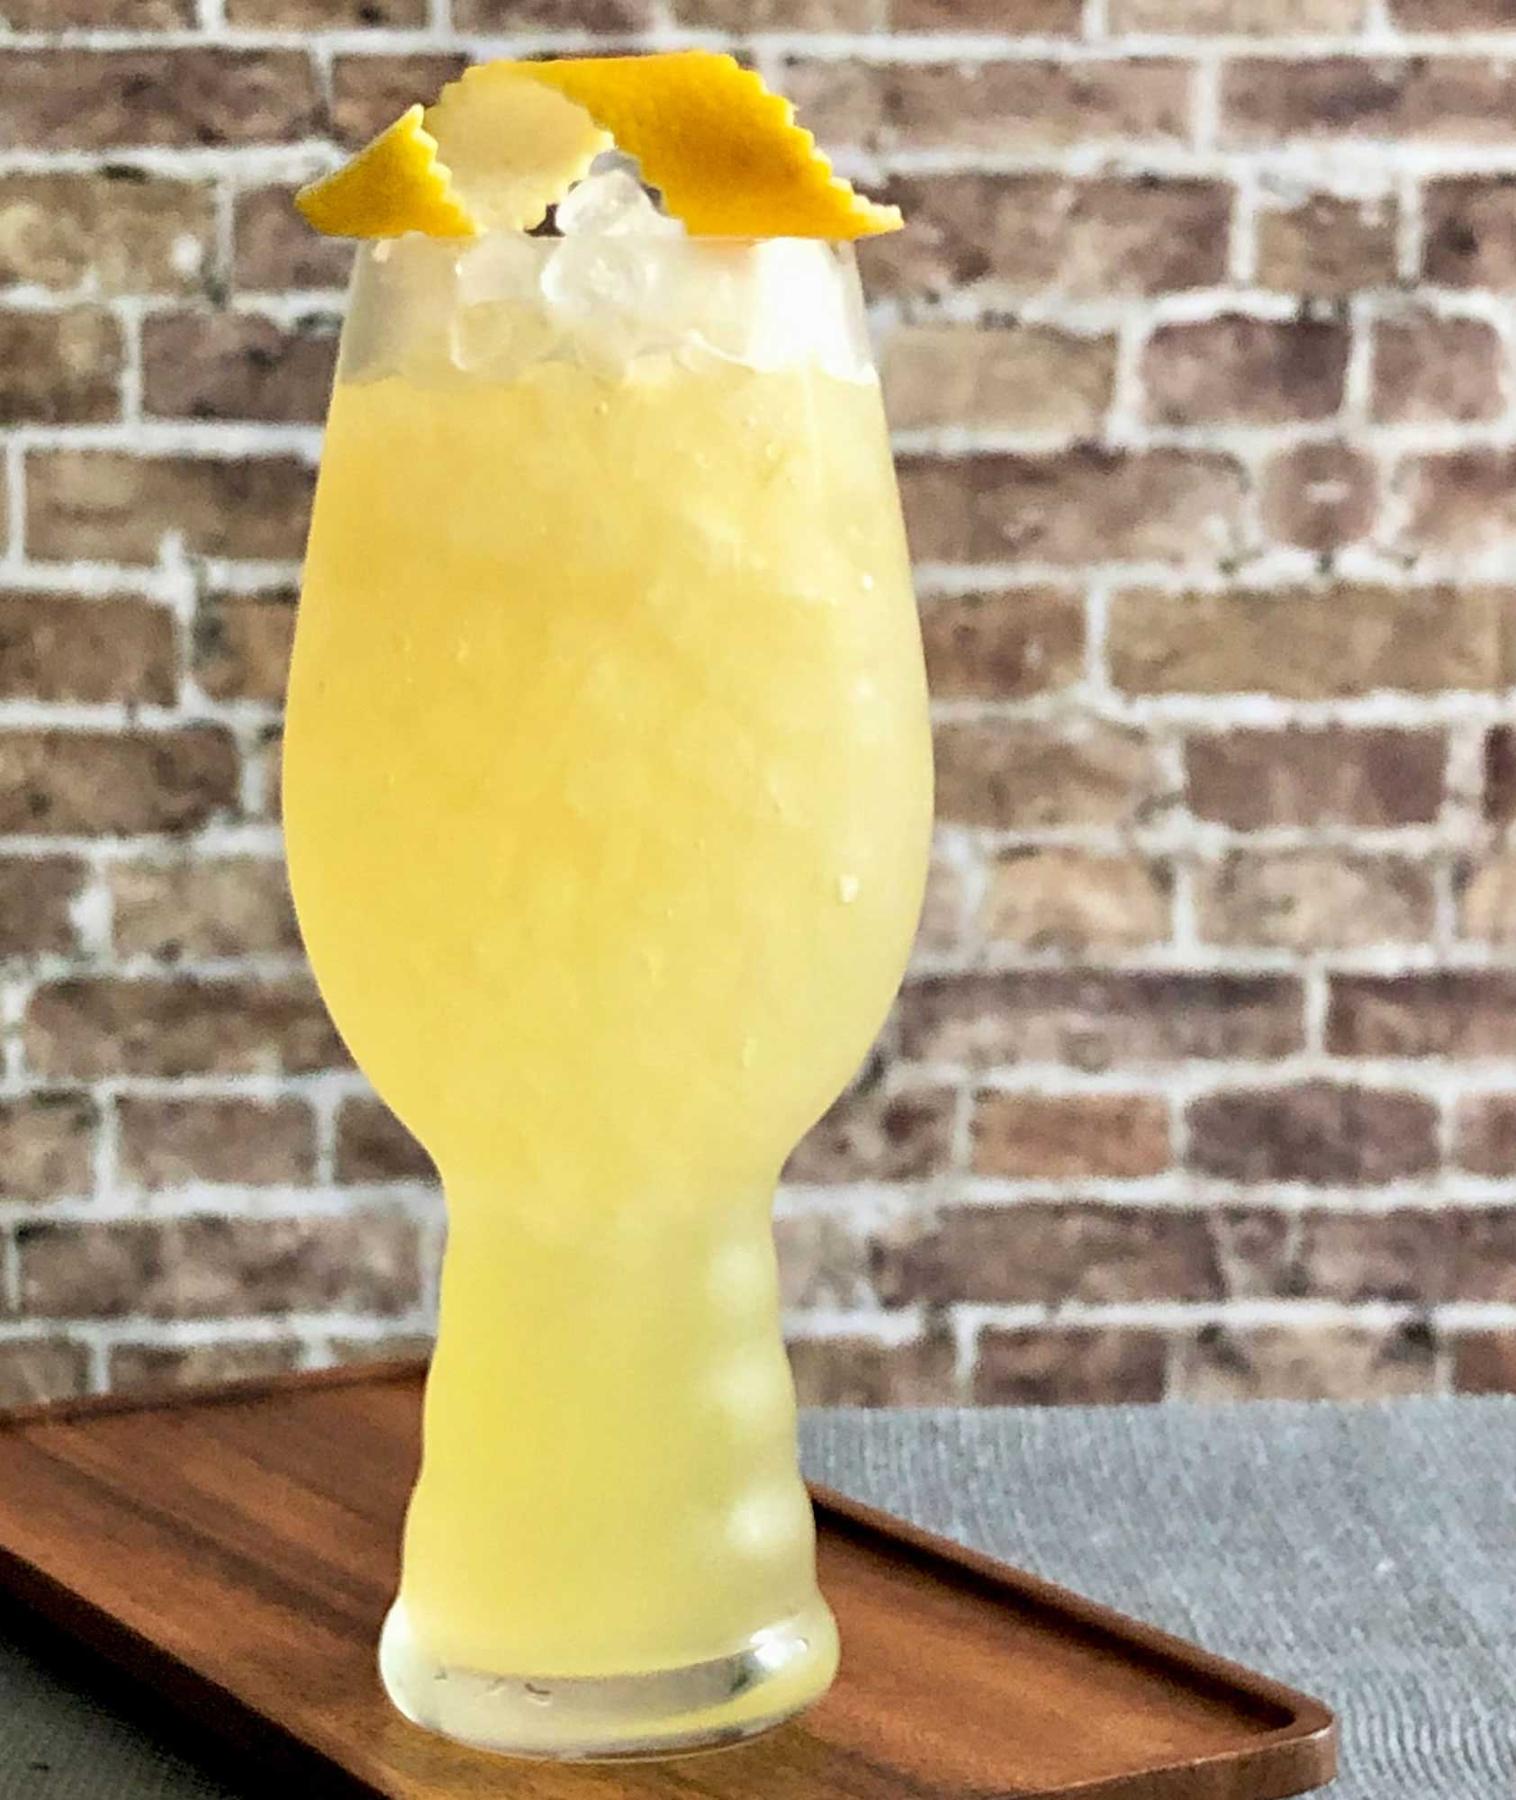 An example of the Strange Brew, the mixed drink (drink), adapted from a drink from Death & Co., New York City, featuring india pale ale, Hayman’s London Dry Gin, pineapple juice, John D. Taylor’s Velvet Falernum, lemon juice, and lemon twist; photo by Lee Edwards